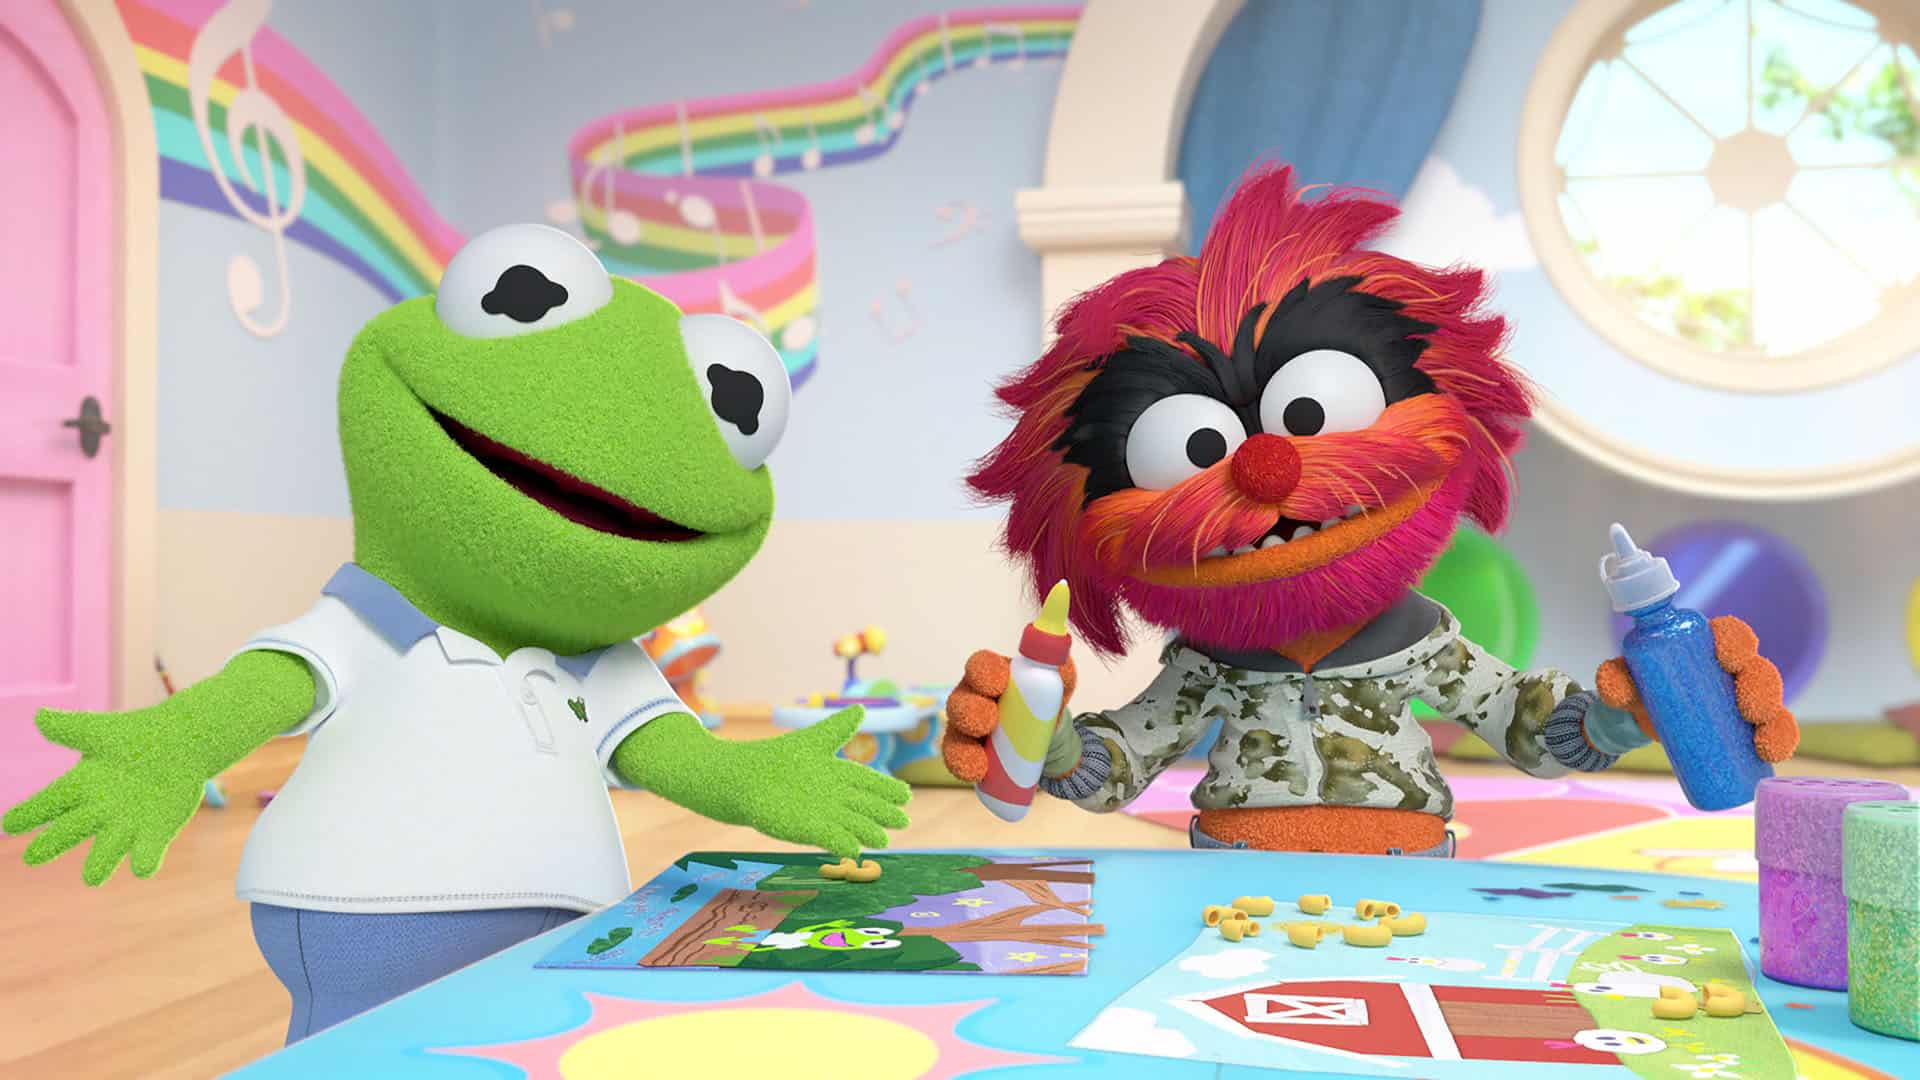 It's a magical time with rainbows, unicorns and 7 awesome kids' shows